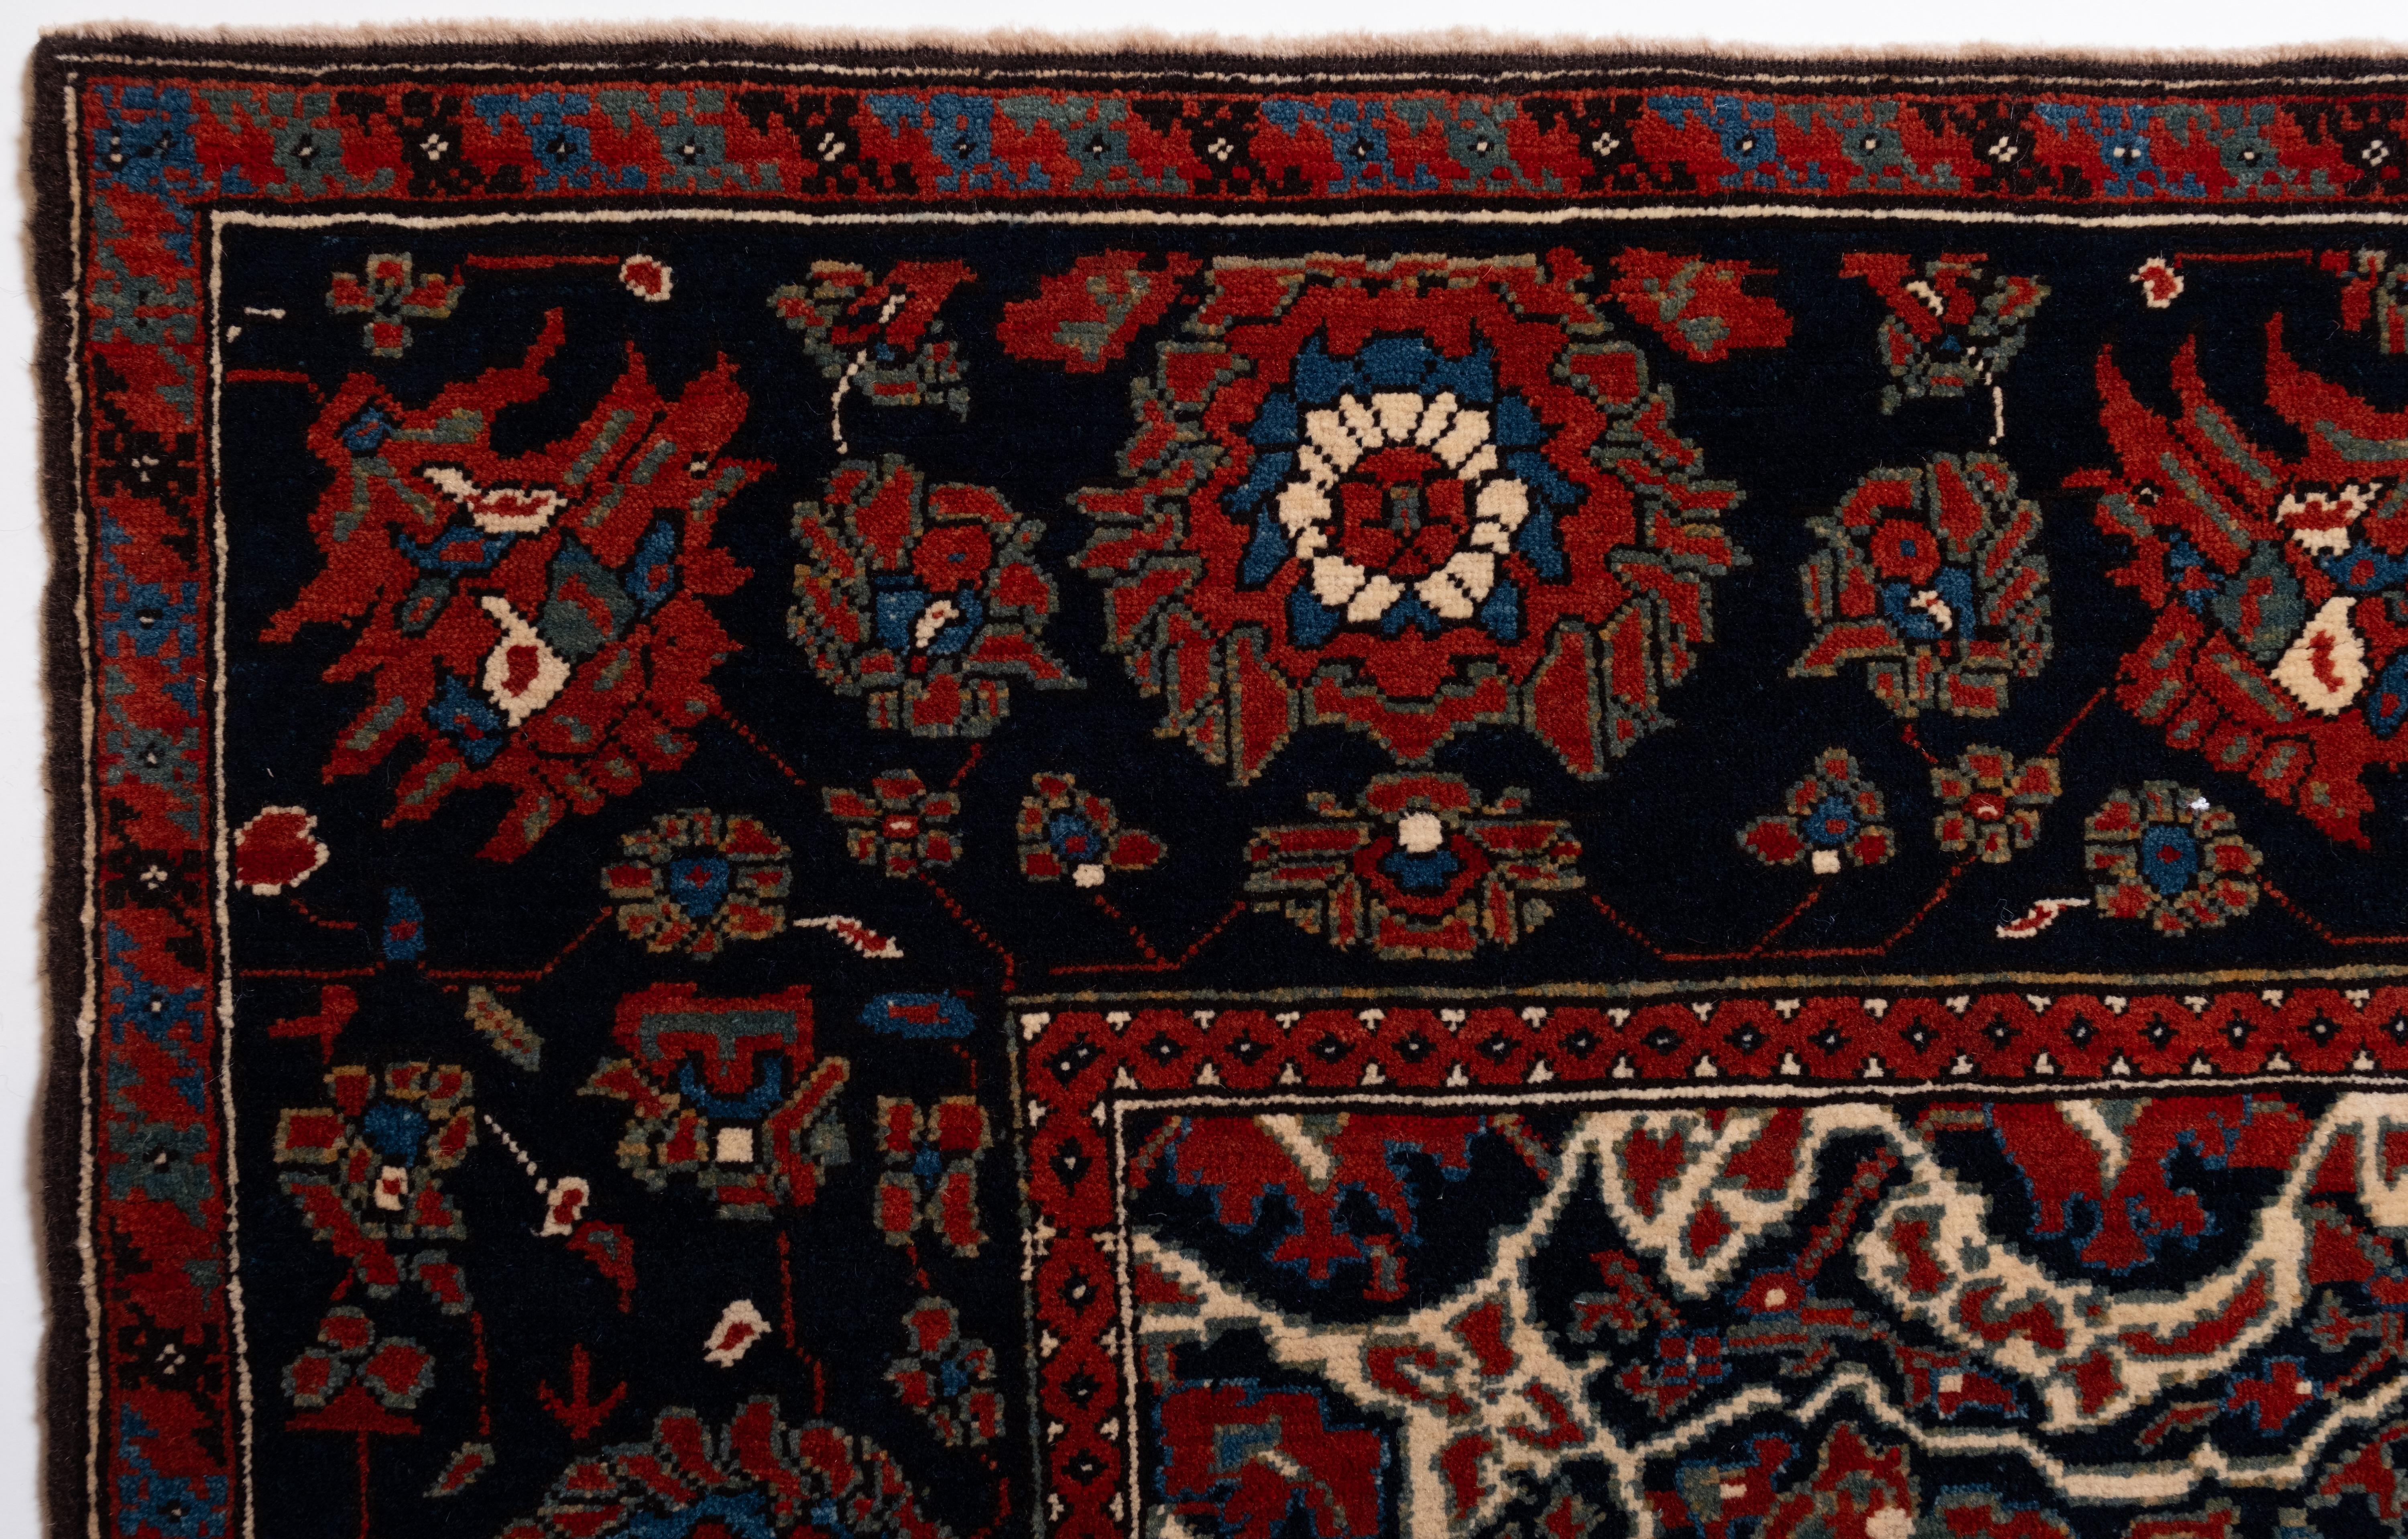 The source of the carpet comes from the book How to Read – Islamic Carpets, Walter B. Denny, The Metropolitan Museum of Art, New York 2014 fig.58 and Antique Rugs from the Near East, Wilhelm von Bode and Ernst Kühnel, Klinkhardt & Biermann, Berlin